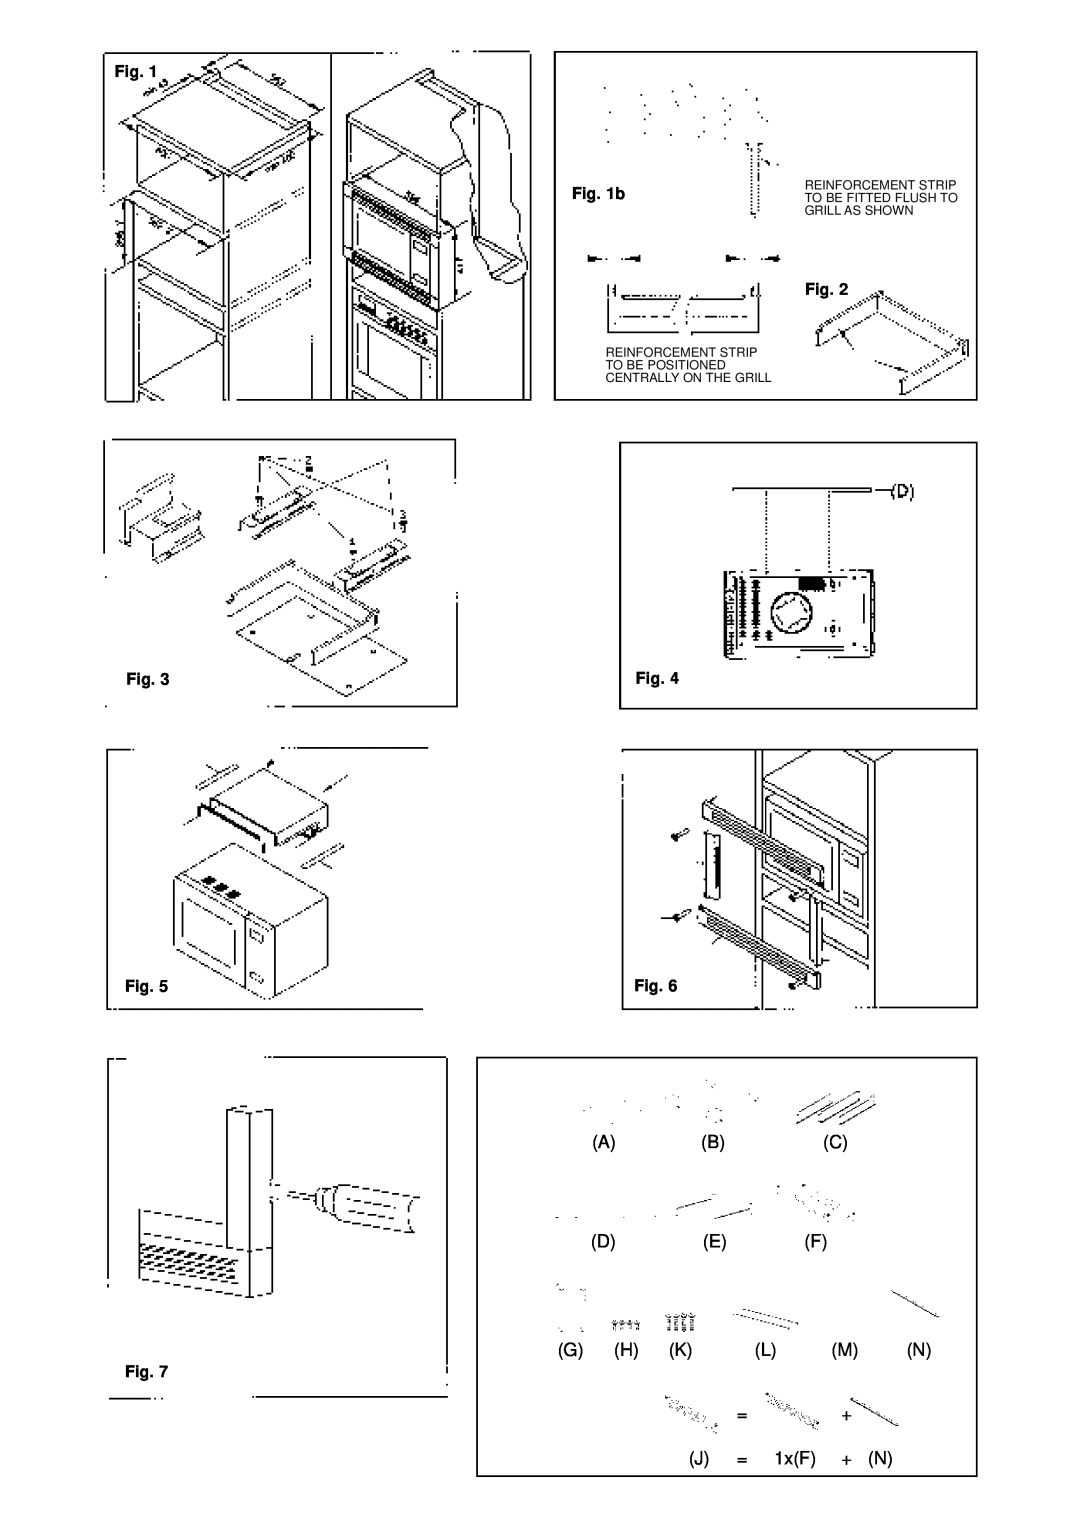 Hotpoint 6665 installation instructions b, Reinforcement Strip To Be Positioned Centrally On The Grill 